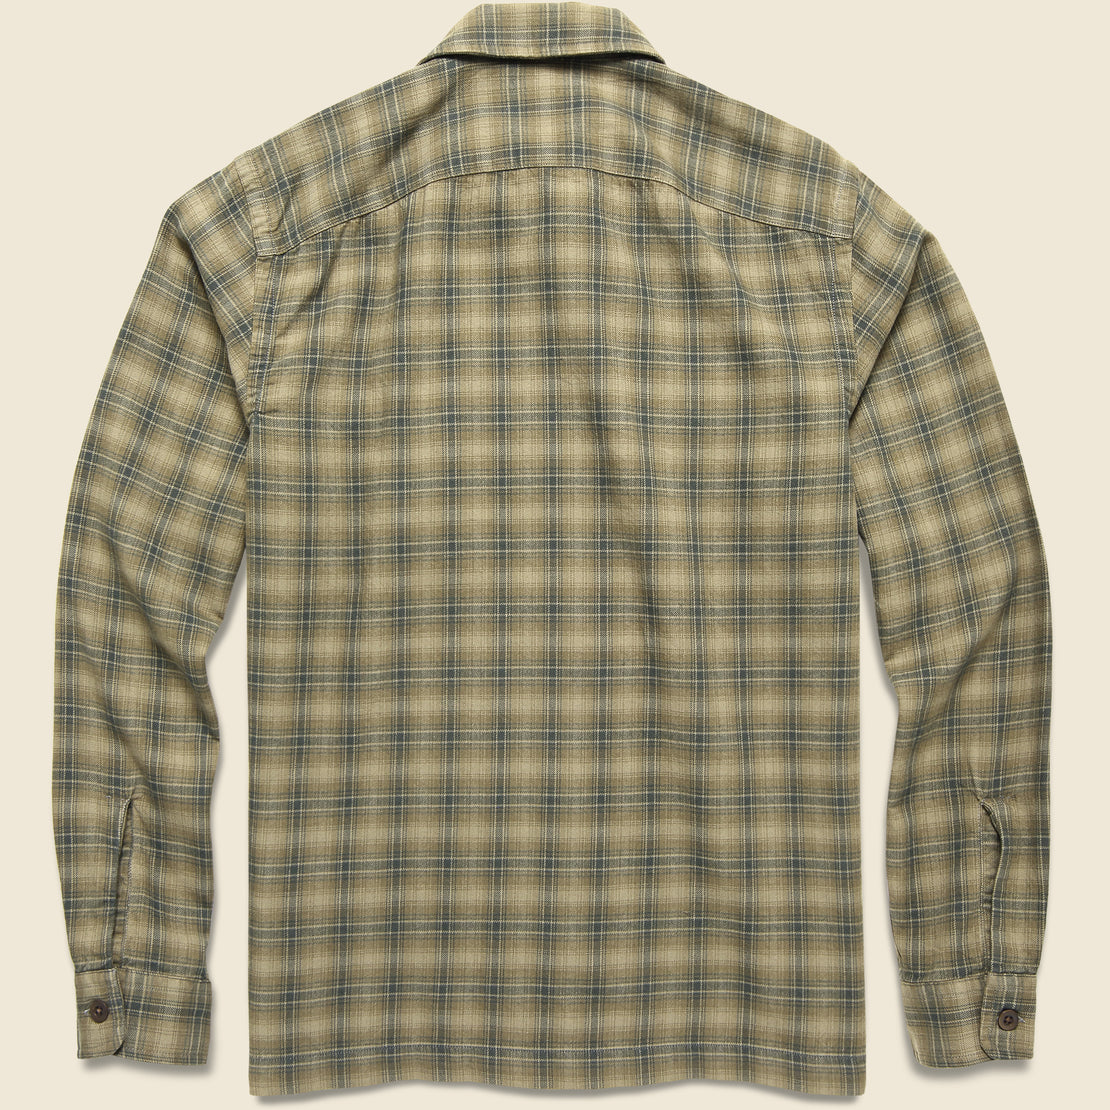 Carter Camp Shirt - Olive - RRL - STAG Provisions - Tops - L/S Woven - Plaid